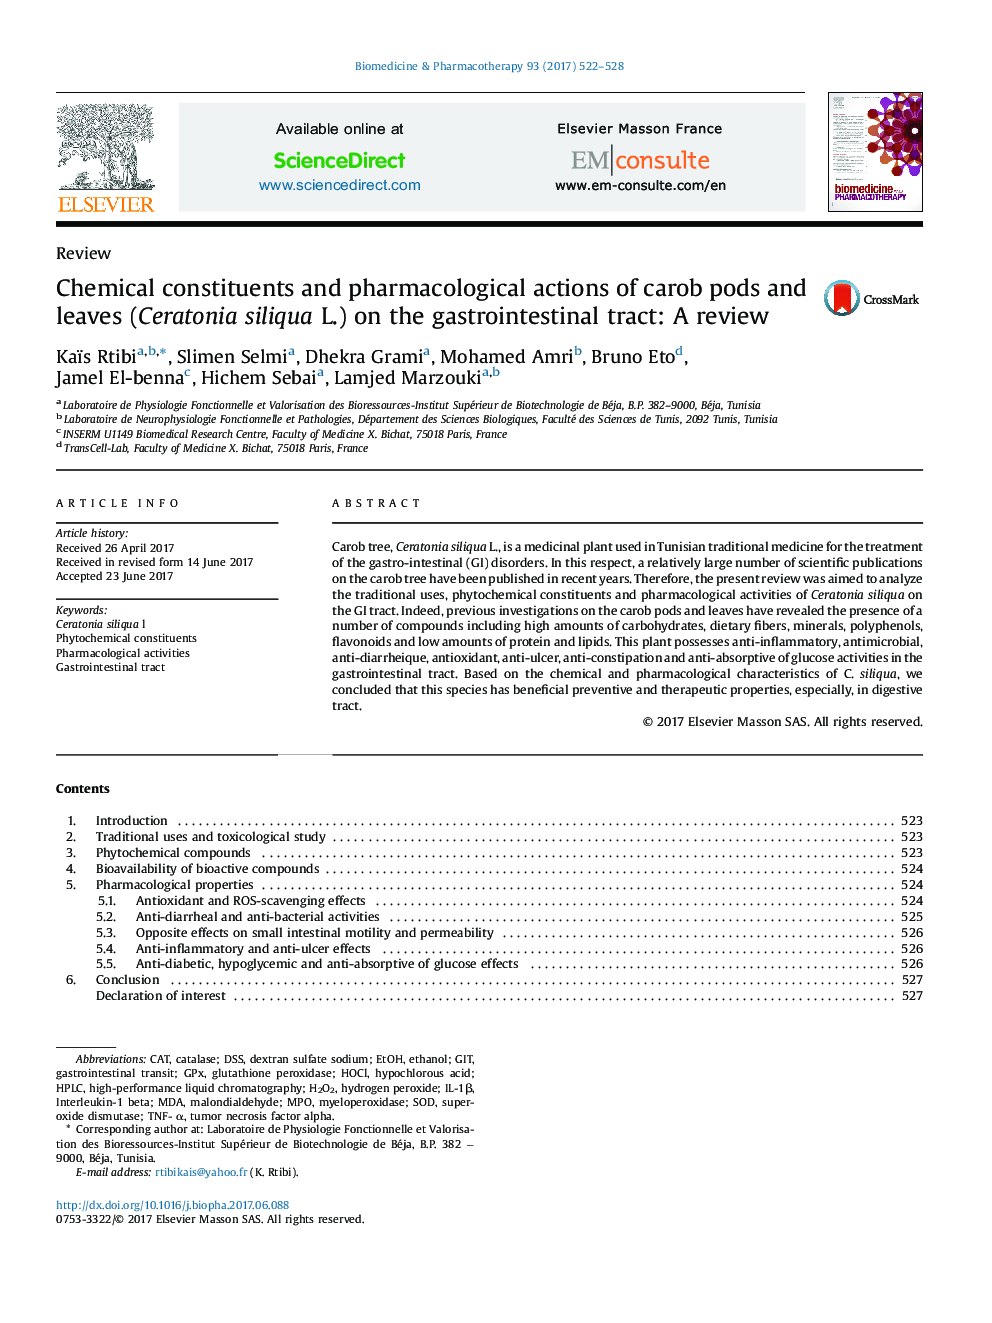 Chemical constituents and pharmacological actions of carob pods and leaves (Ceratonia siliqua L.) on the gastrointestinal tract: A review